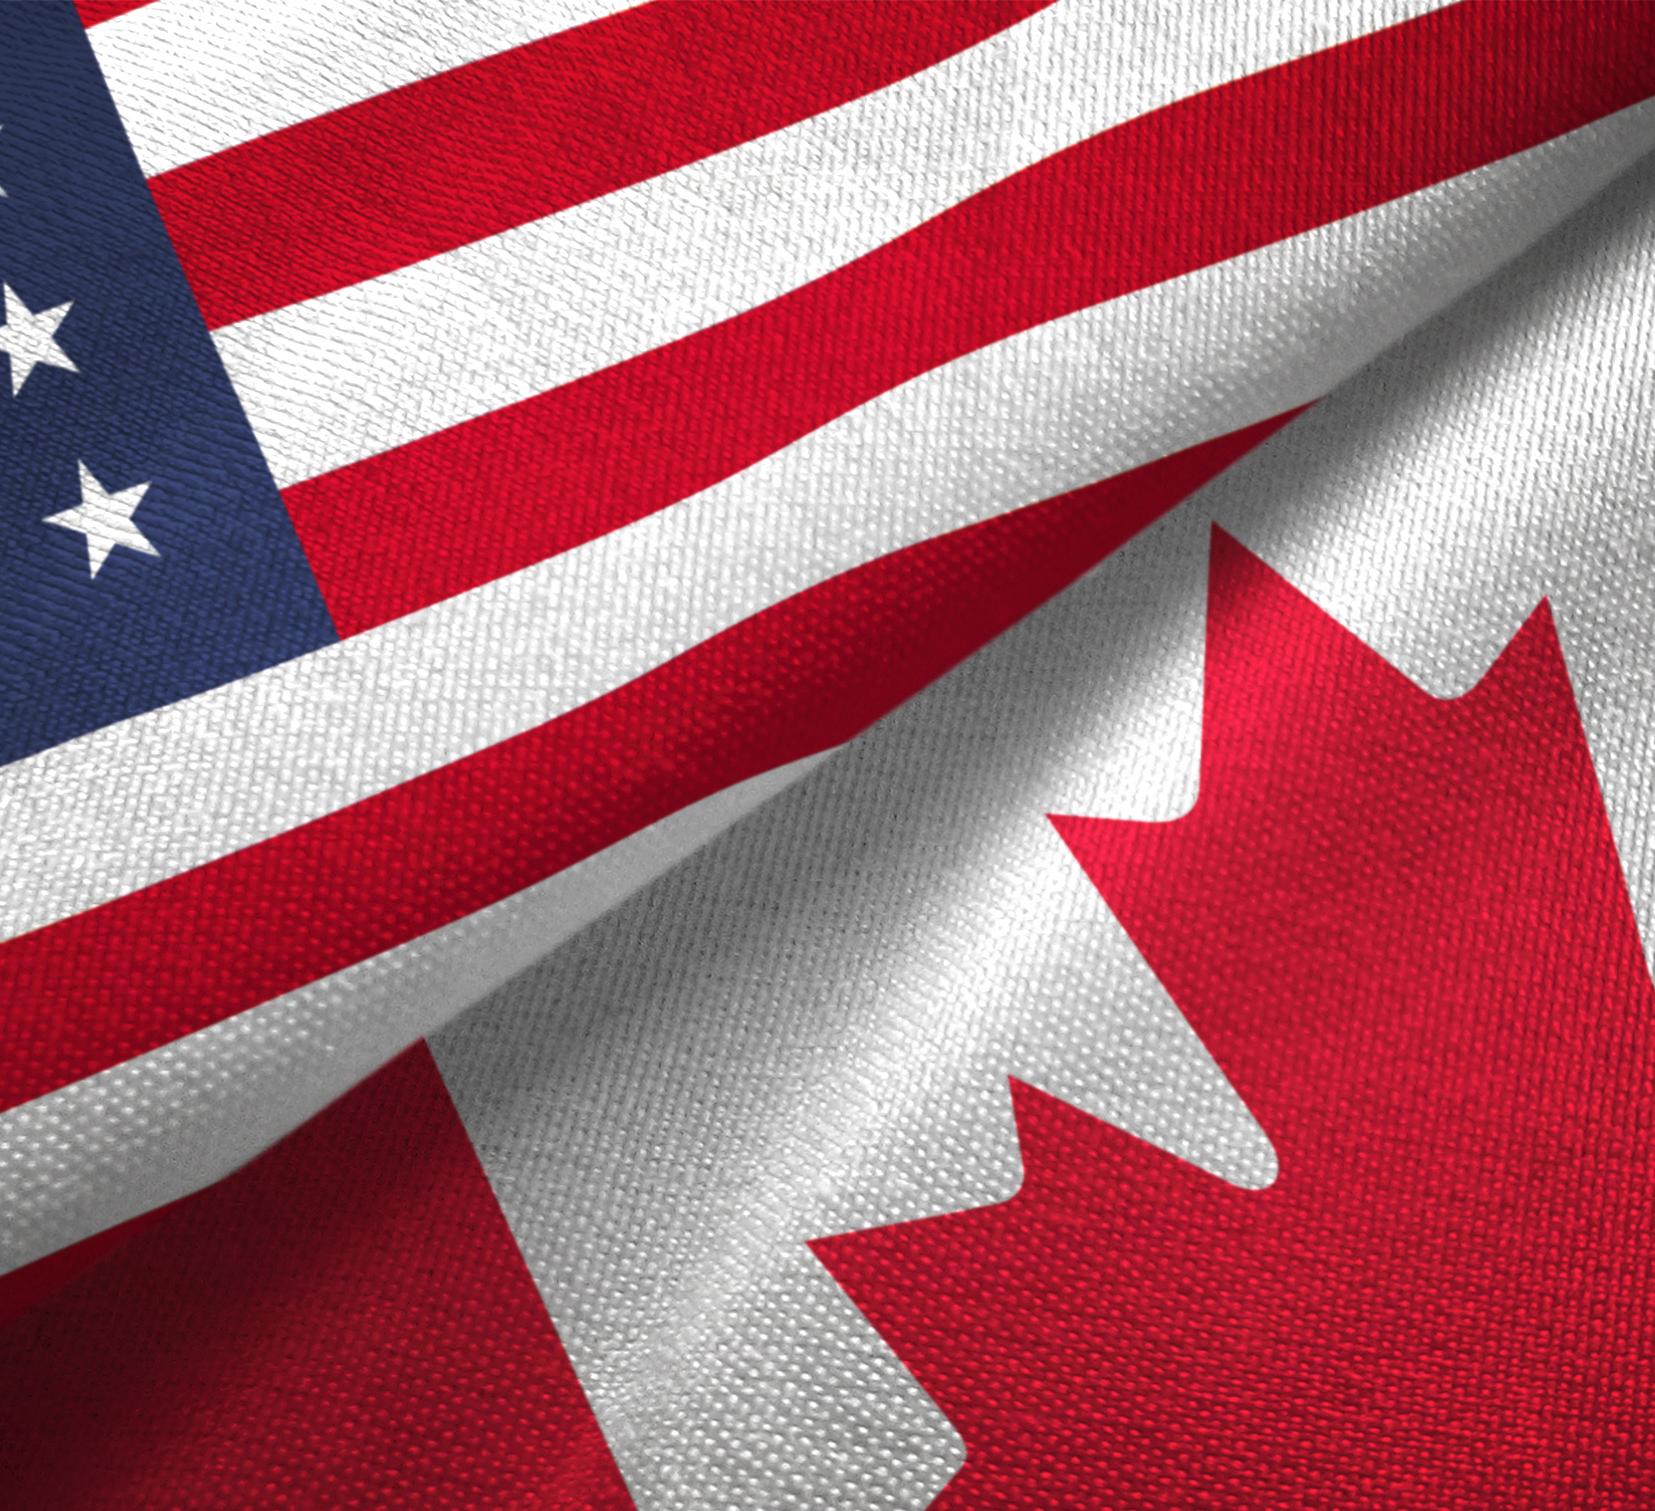 Canada and United States two flags